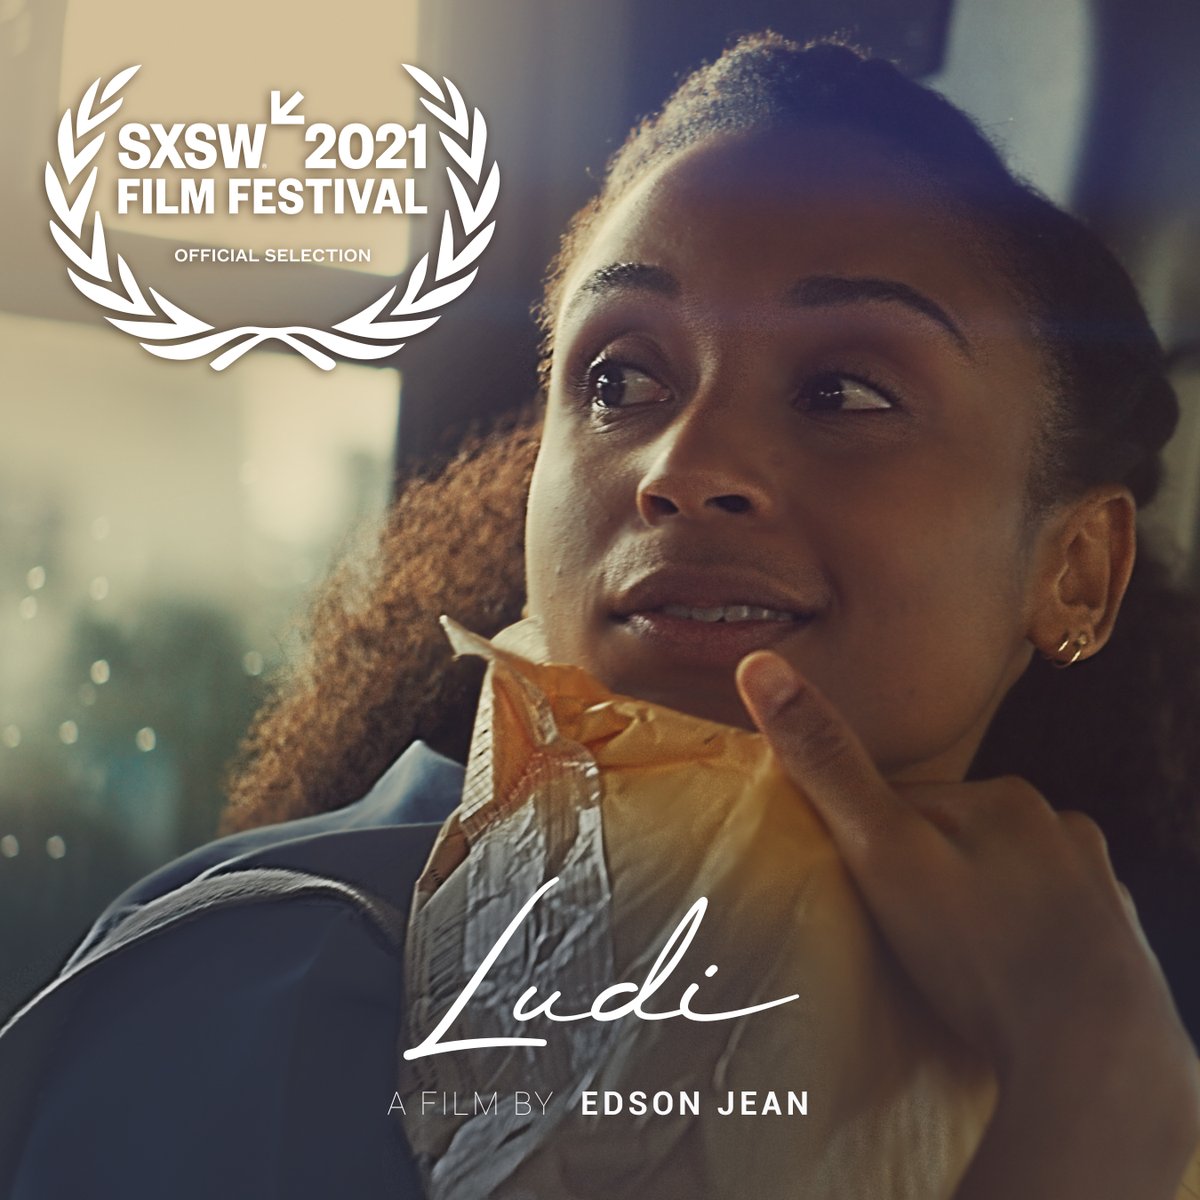 SXSW starts tomorrow!  If you have a pass to this year’s virtual film fest, check out #Ludi screening in the Narrative Spotlight section. 

#LudiFilm #SxSW  #LudiSXSW #SXSWLudi @BantufyFilms @sxsw

ow.ly/JXBp50DZrKj